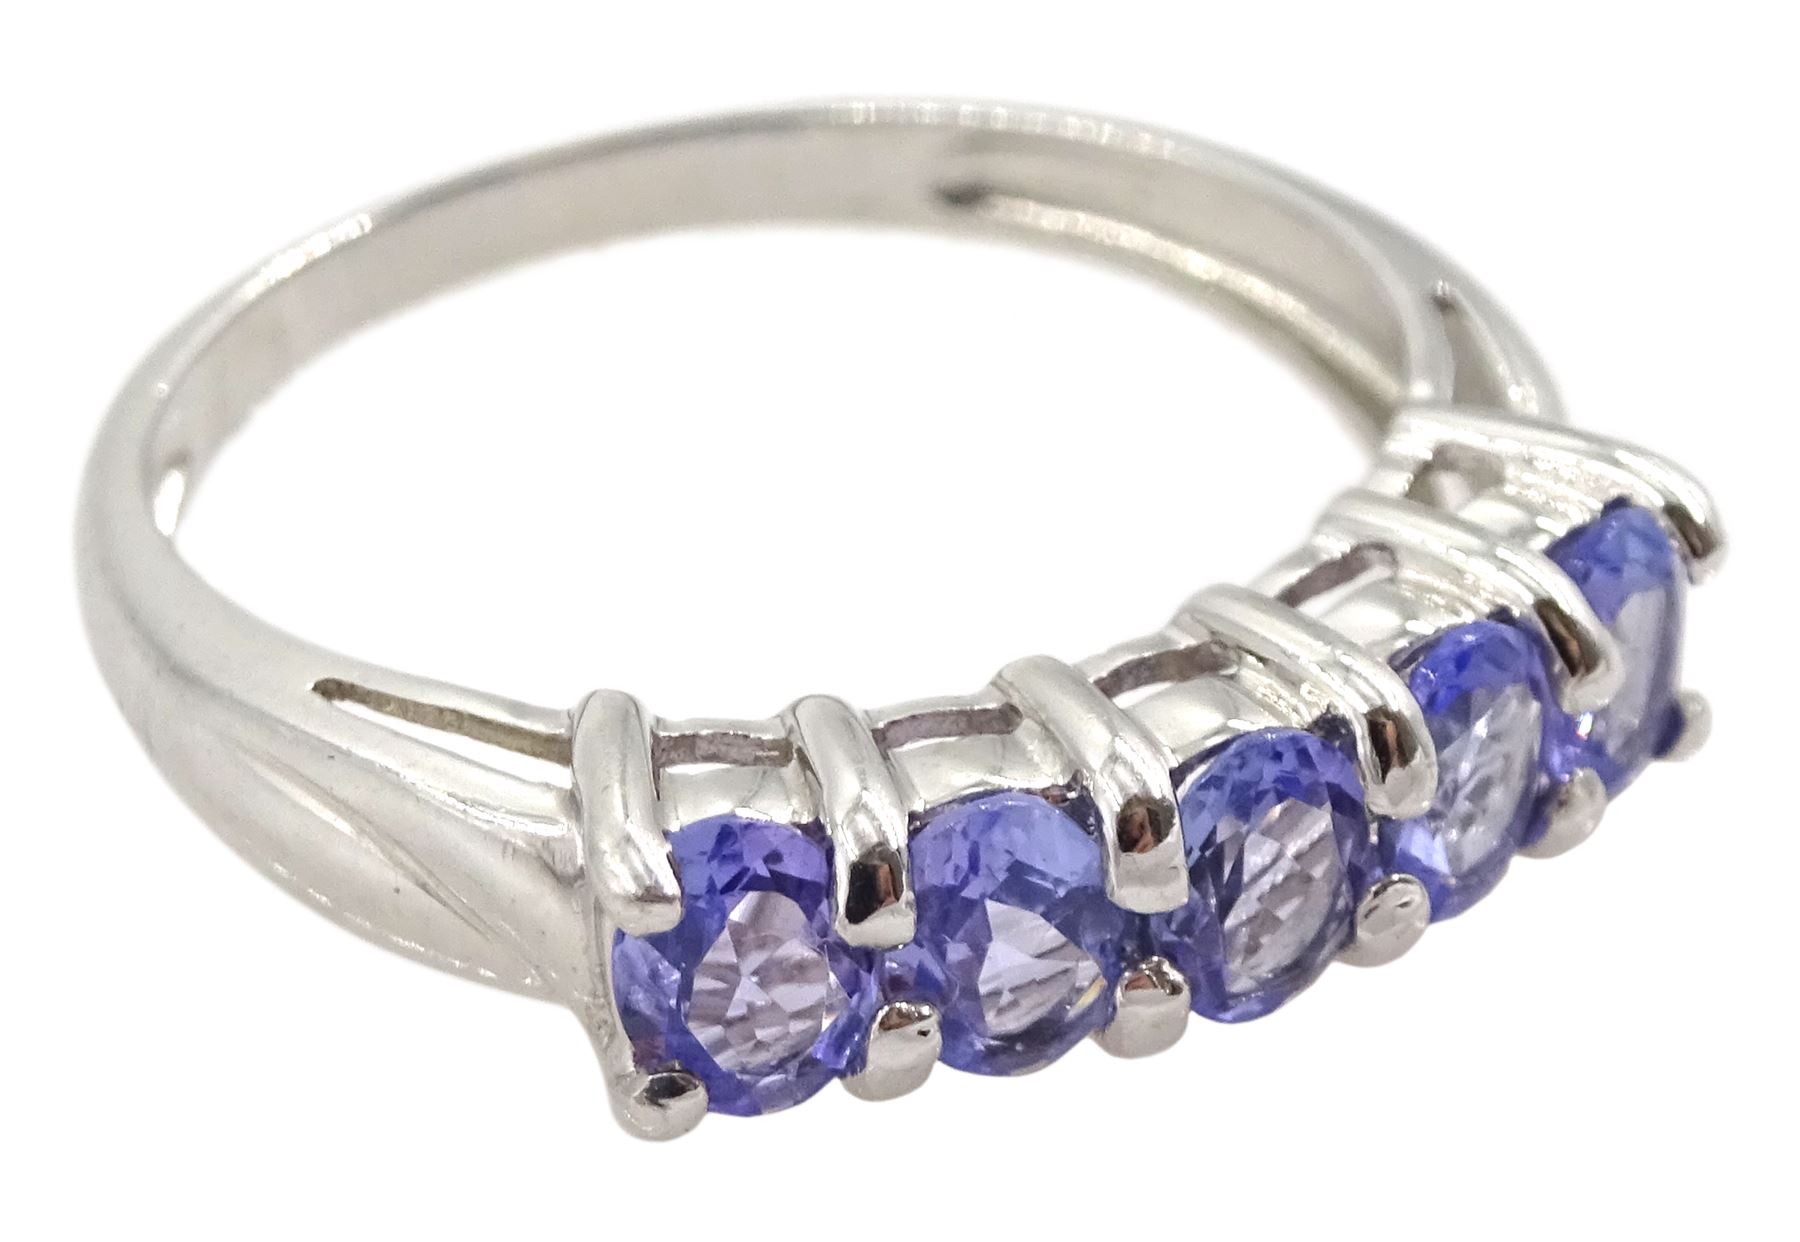 9ct white gold five stone oval tanzanite ring - Image 3 of 4